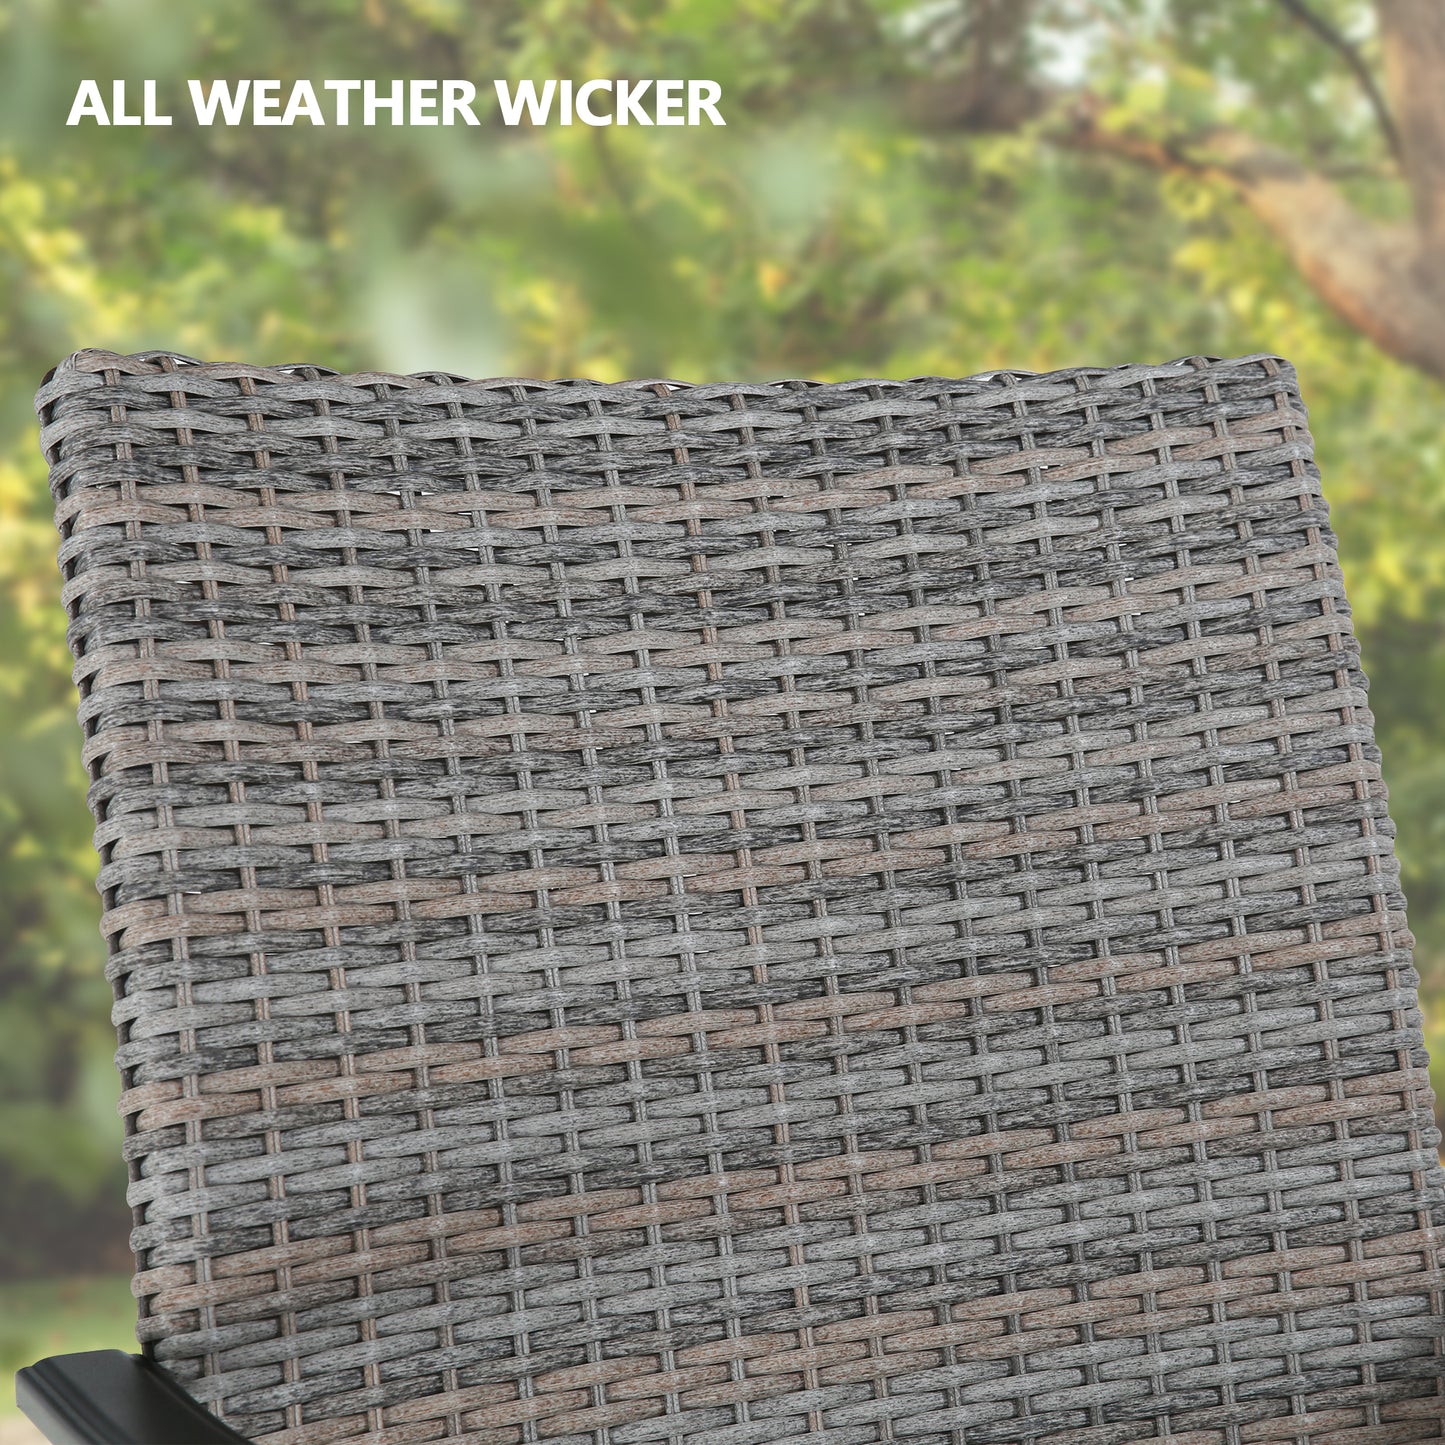 Patio Wicker Dining Chairs Outdoor Heavy-Duty Steel Frame Rattan Chairs with Quick Dry Foam Filling and Curved Backrest, Set of 2